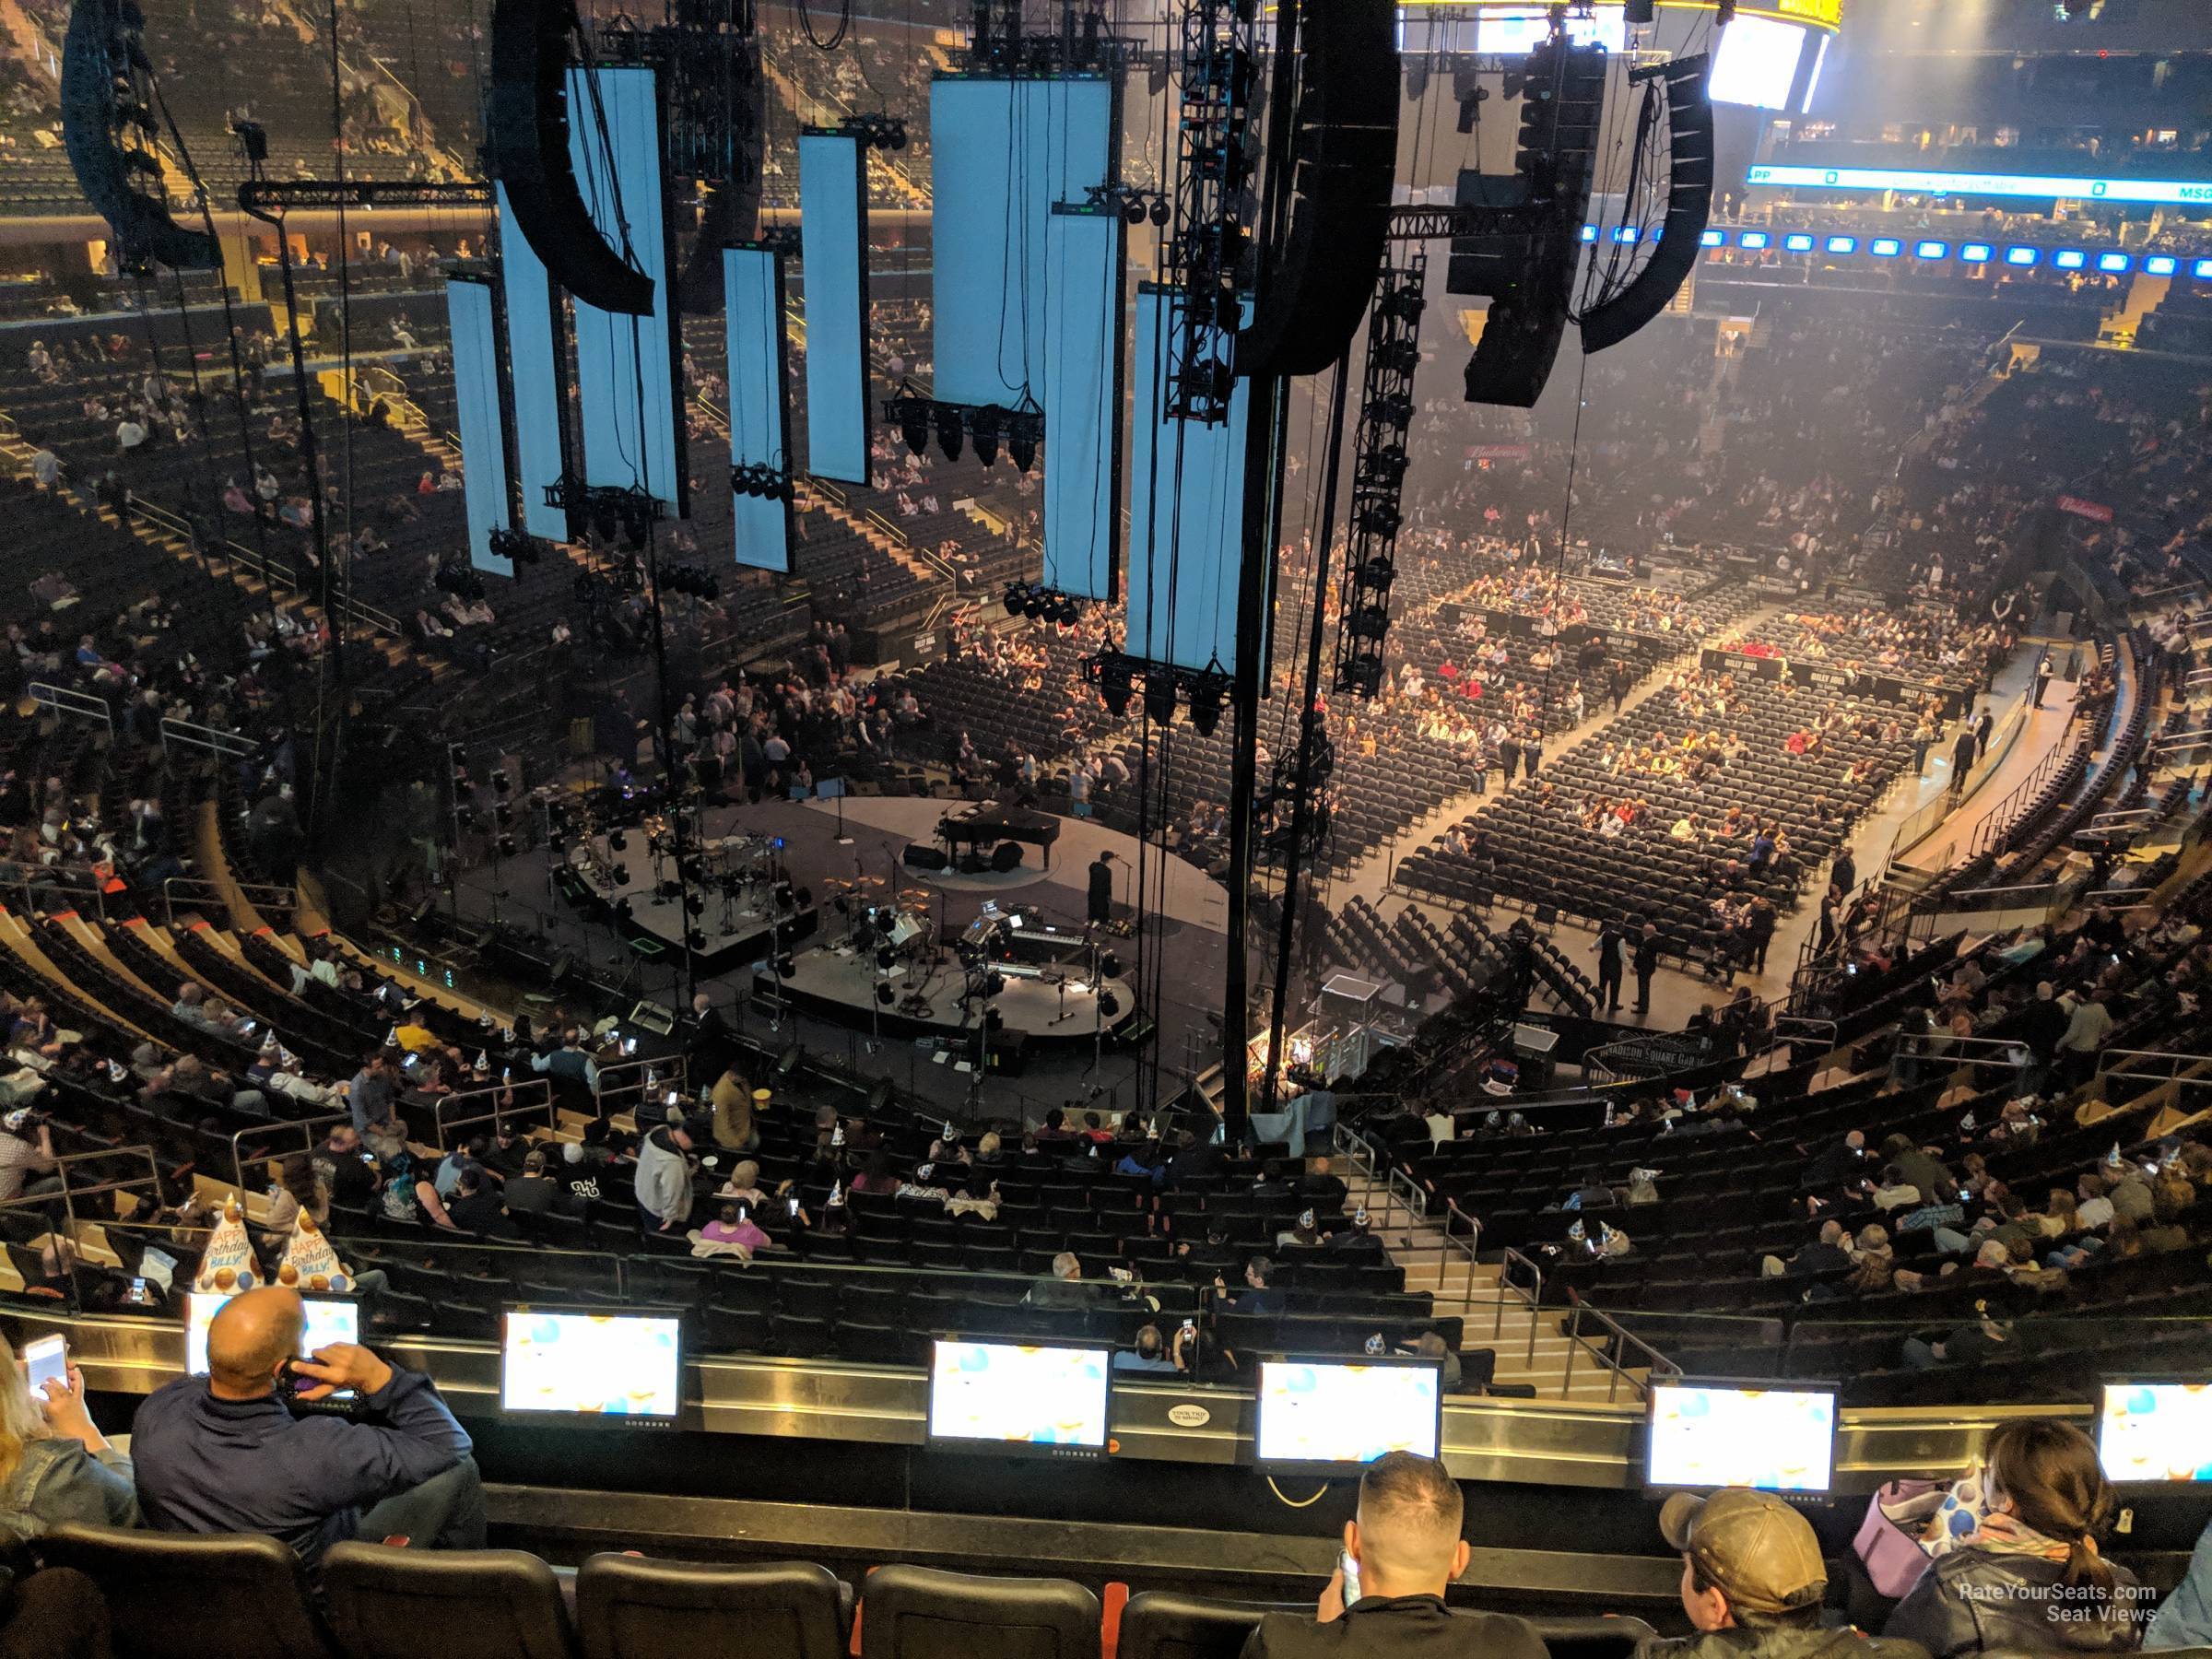 section 219, row 5 seat view  for concert - madison square garden